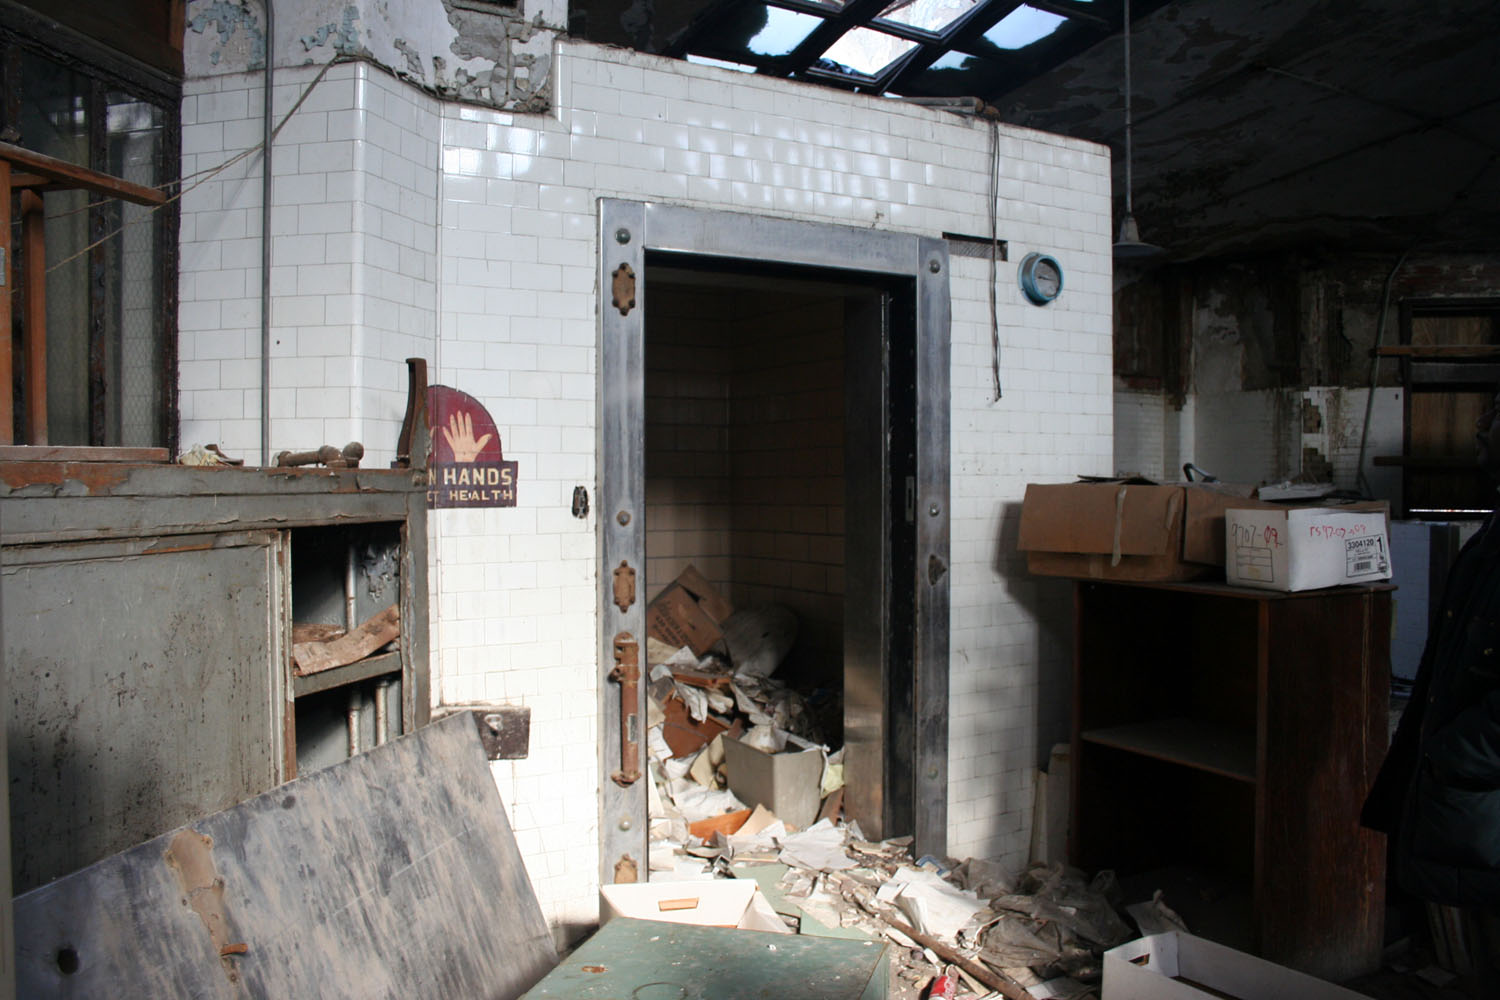 The Old Kitchen at Sea View Hospital